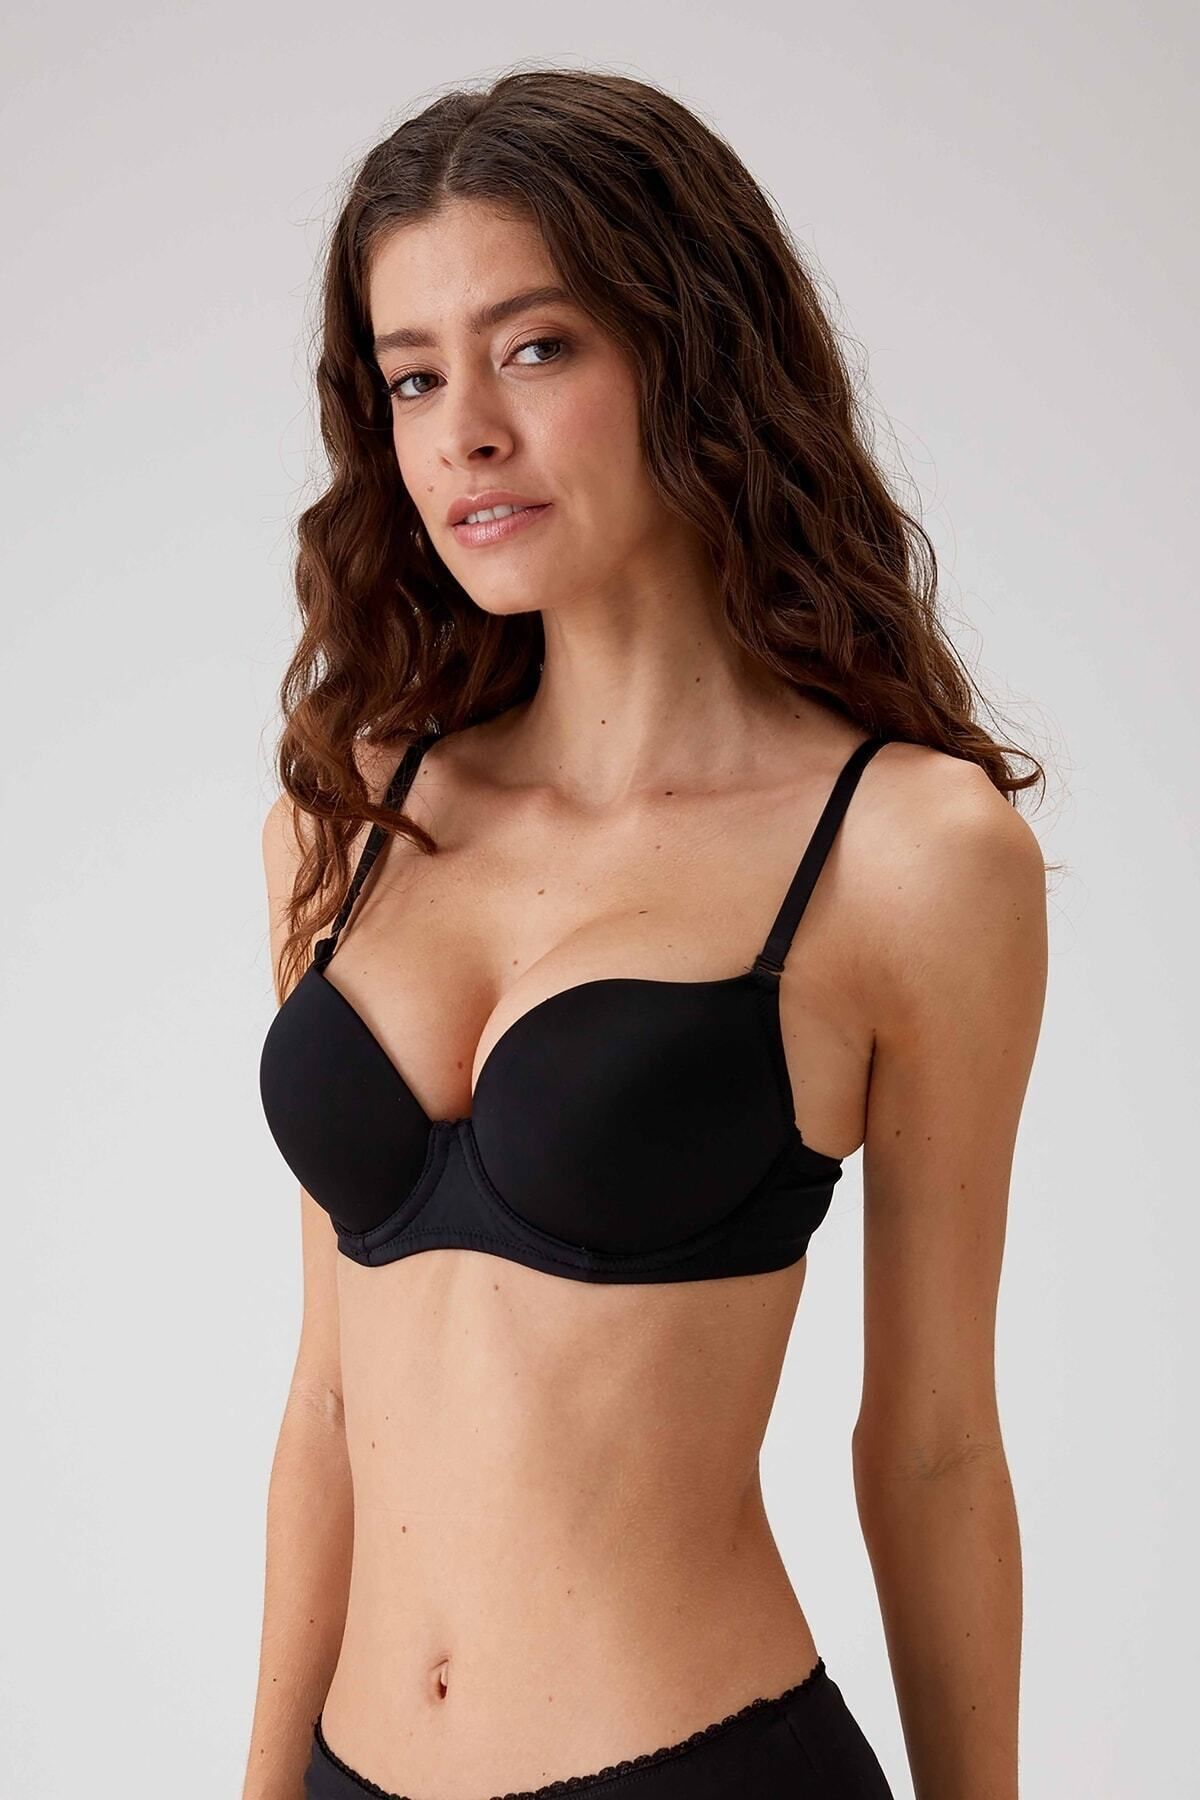 Pierre Cardin Women's Black 6105 Lyon Extra Push Up Padded Micro Bra (WITH  REMOVABLE AND ADJUSTABLE STRAPS) - Trendyol